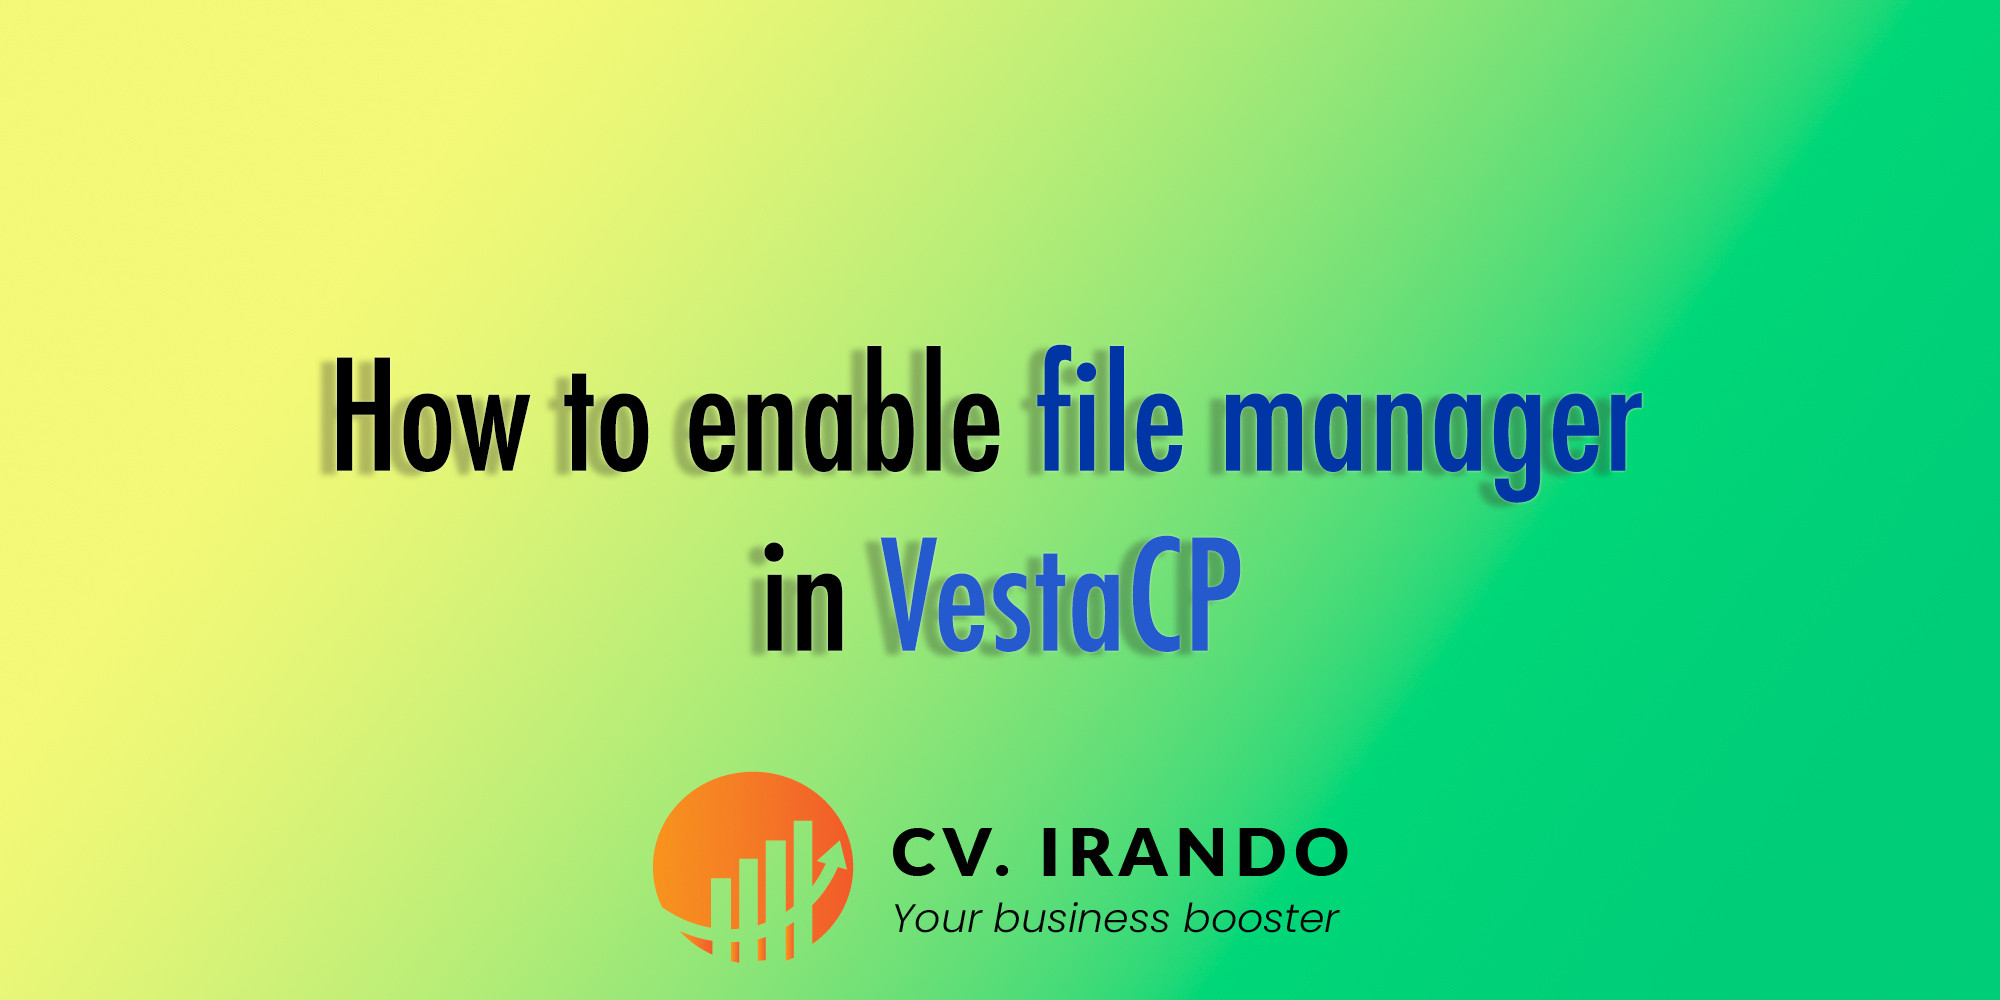 How to enable file manager in vestacp